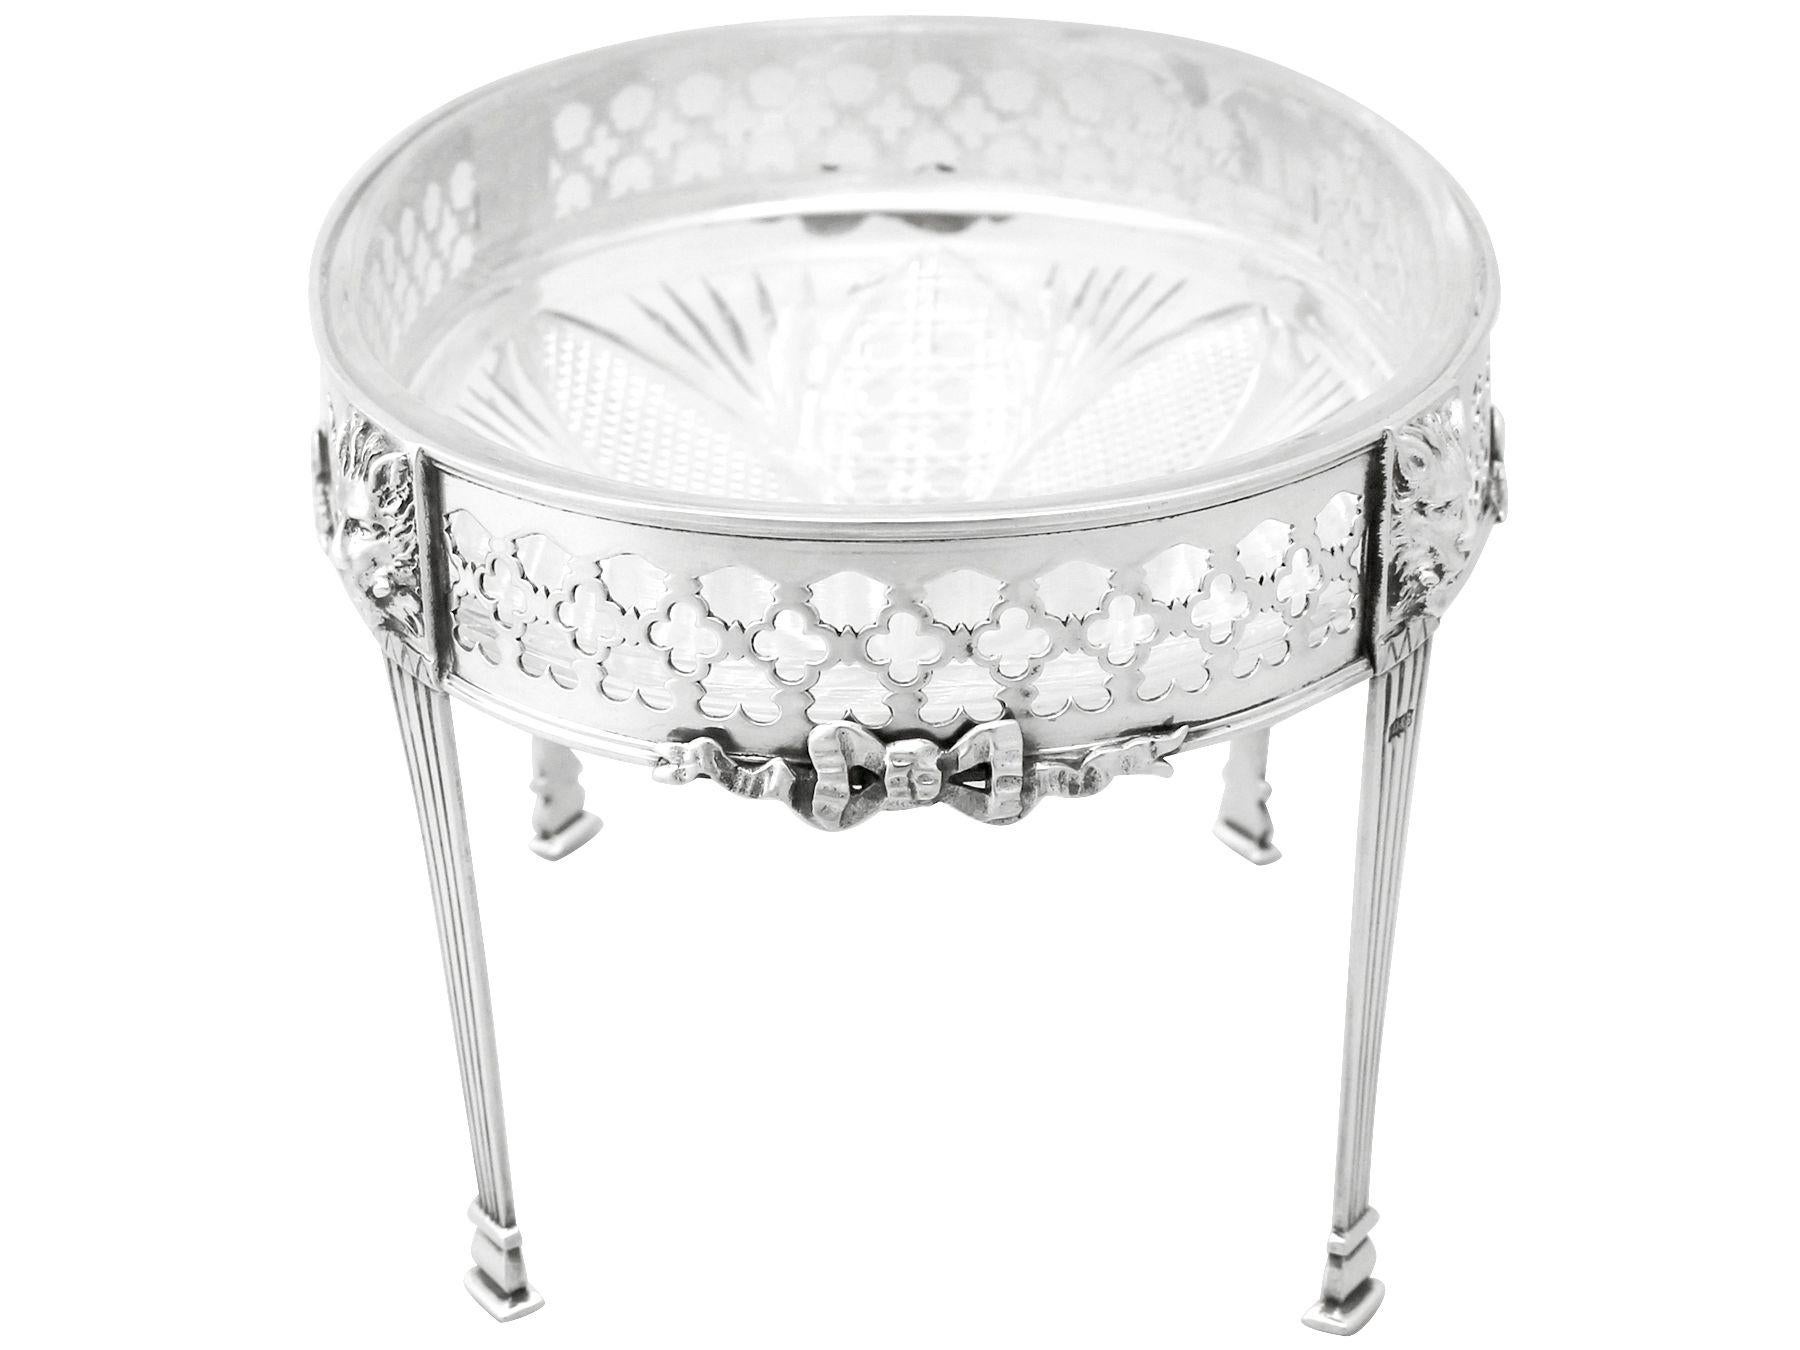 Antique Victorian Sterling Silver and Cut-Glass Centerpiece In Excellent Condition For Sale In Jesmond, Newcastle Upon Tyne